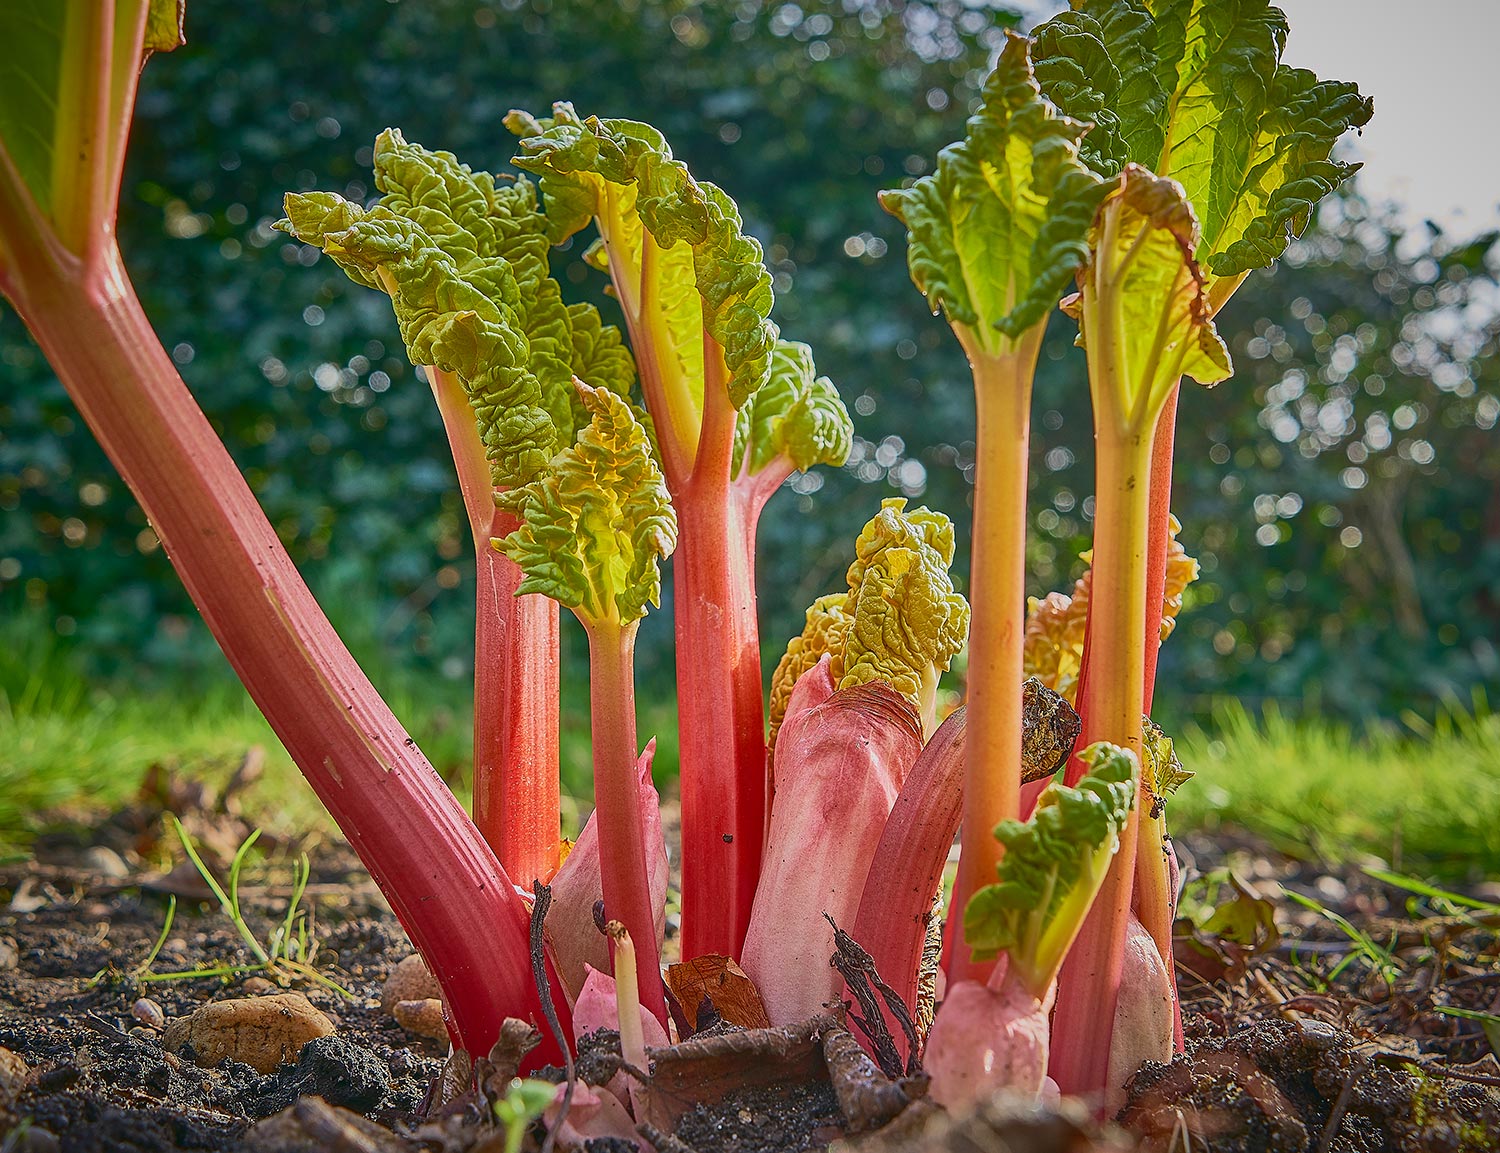 New rhubarb shoots sprouting in a garden in spring